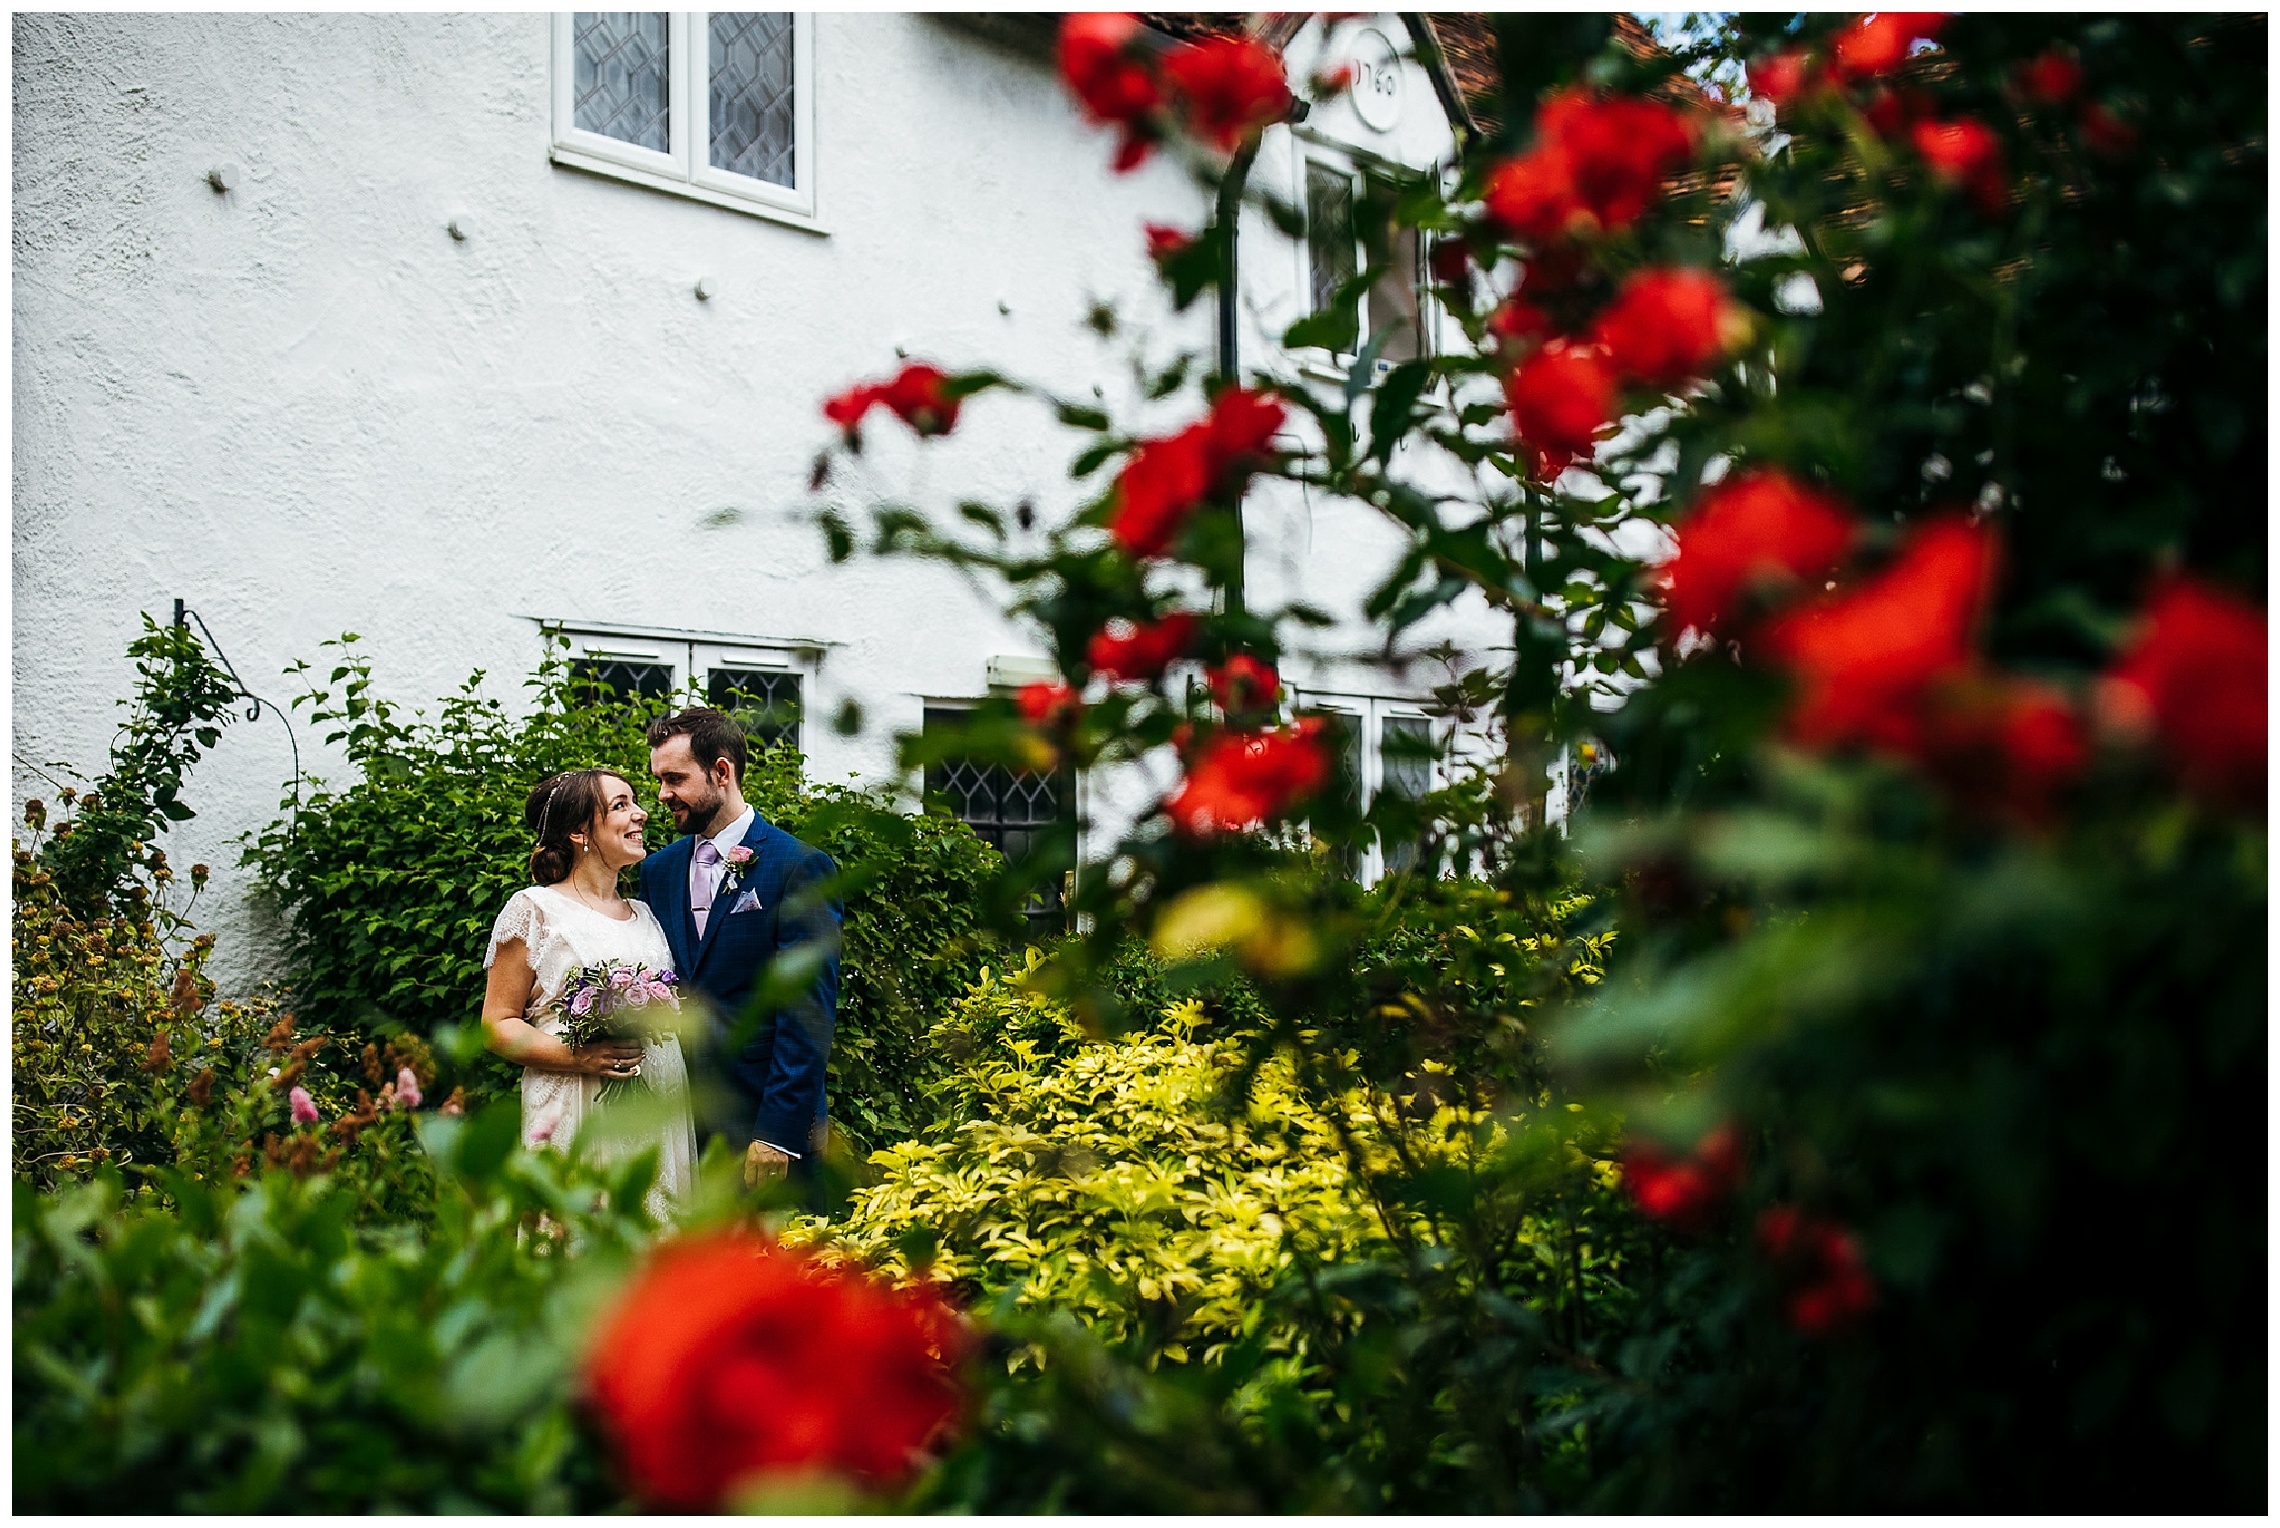 bride and groom in background with red roses in foreground